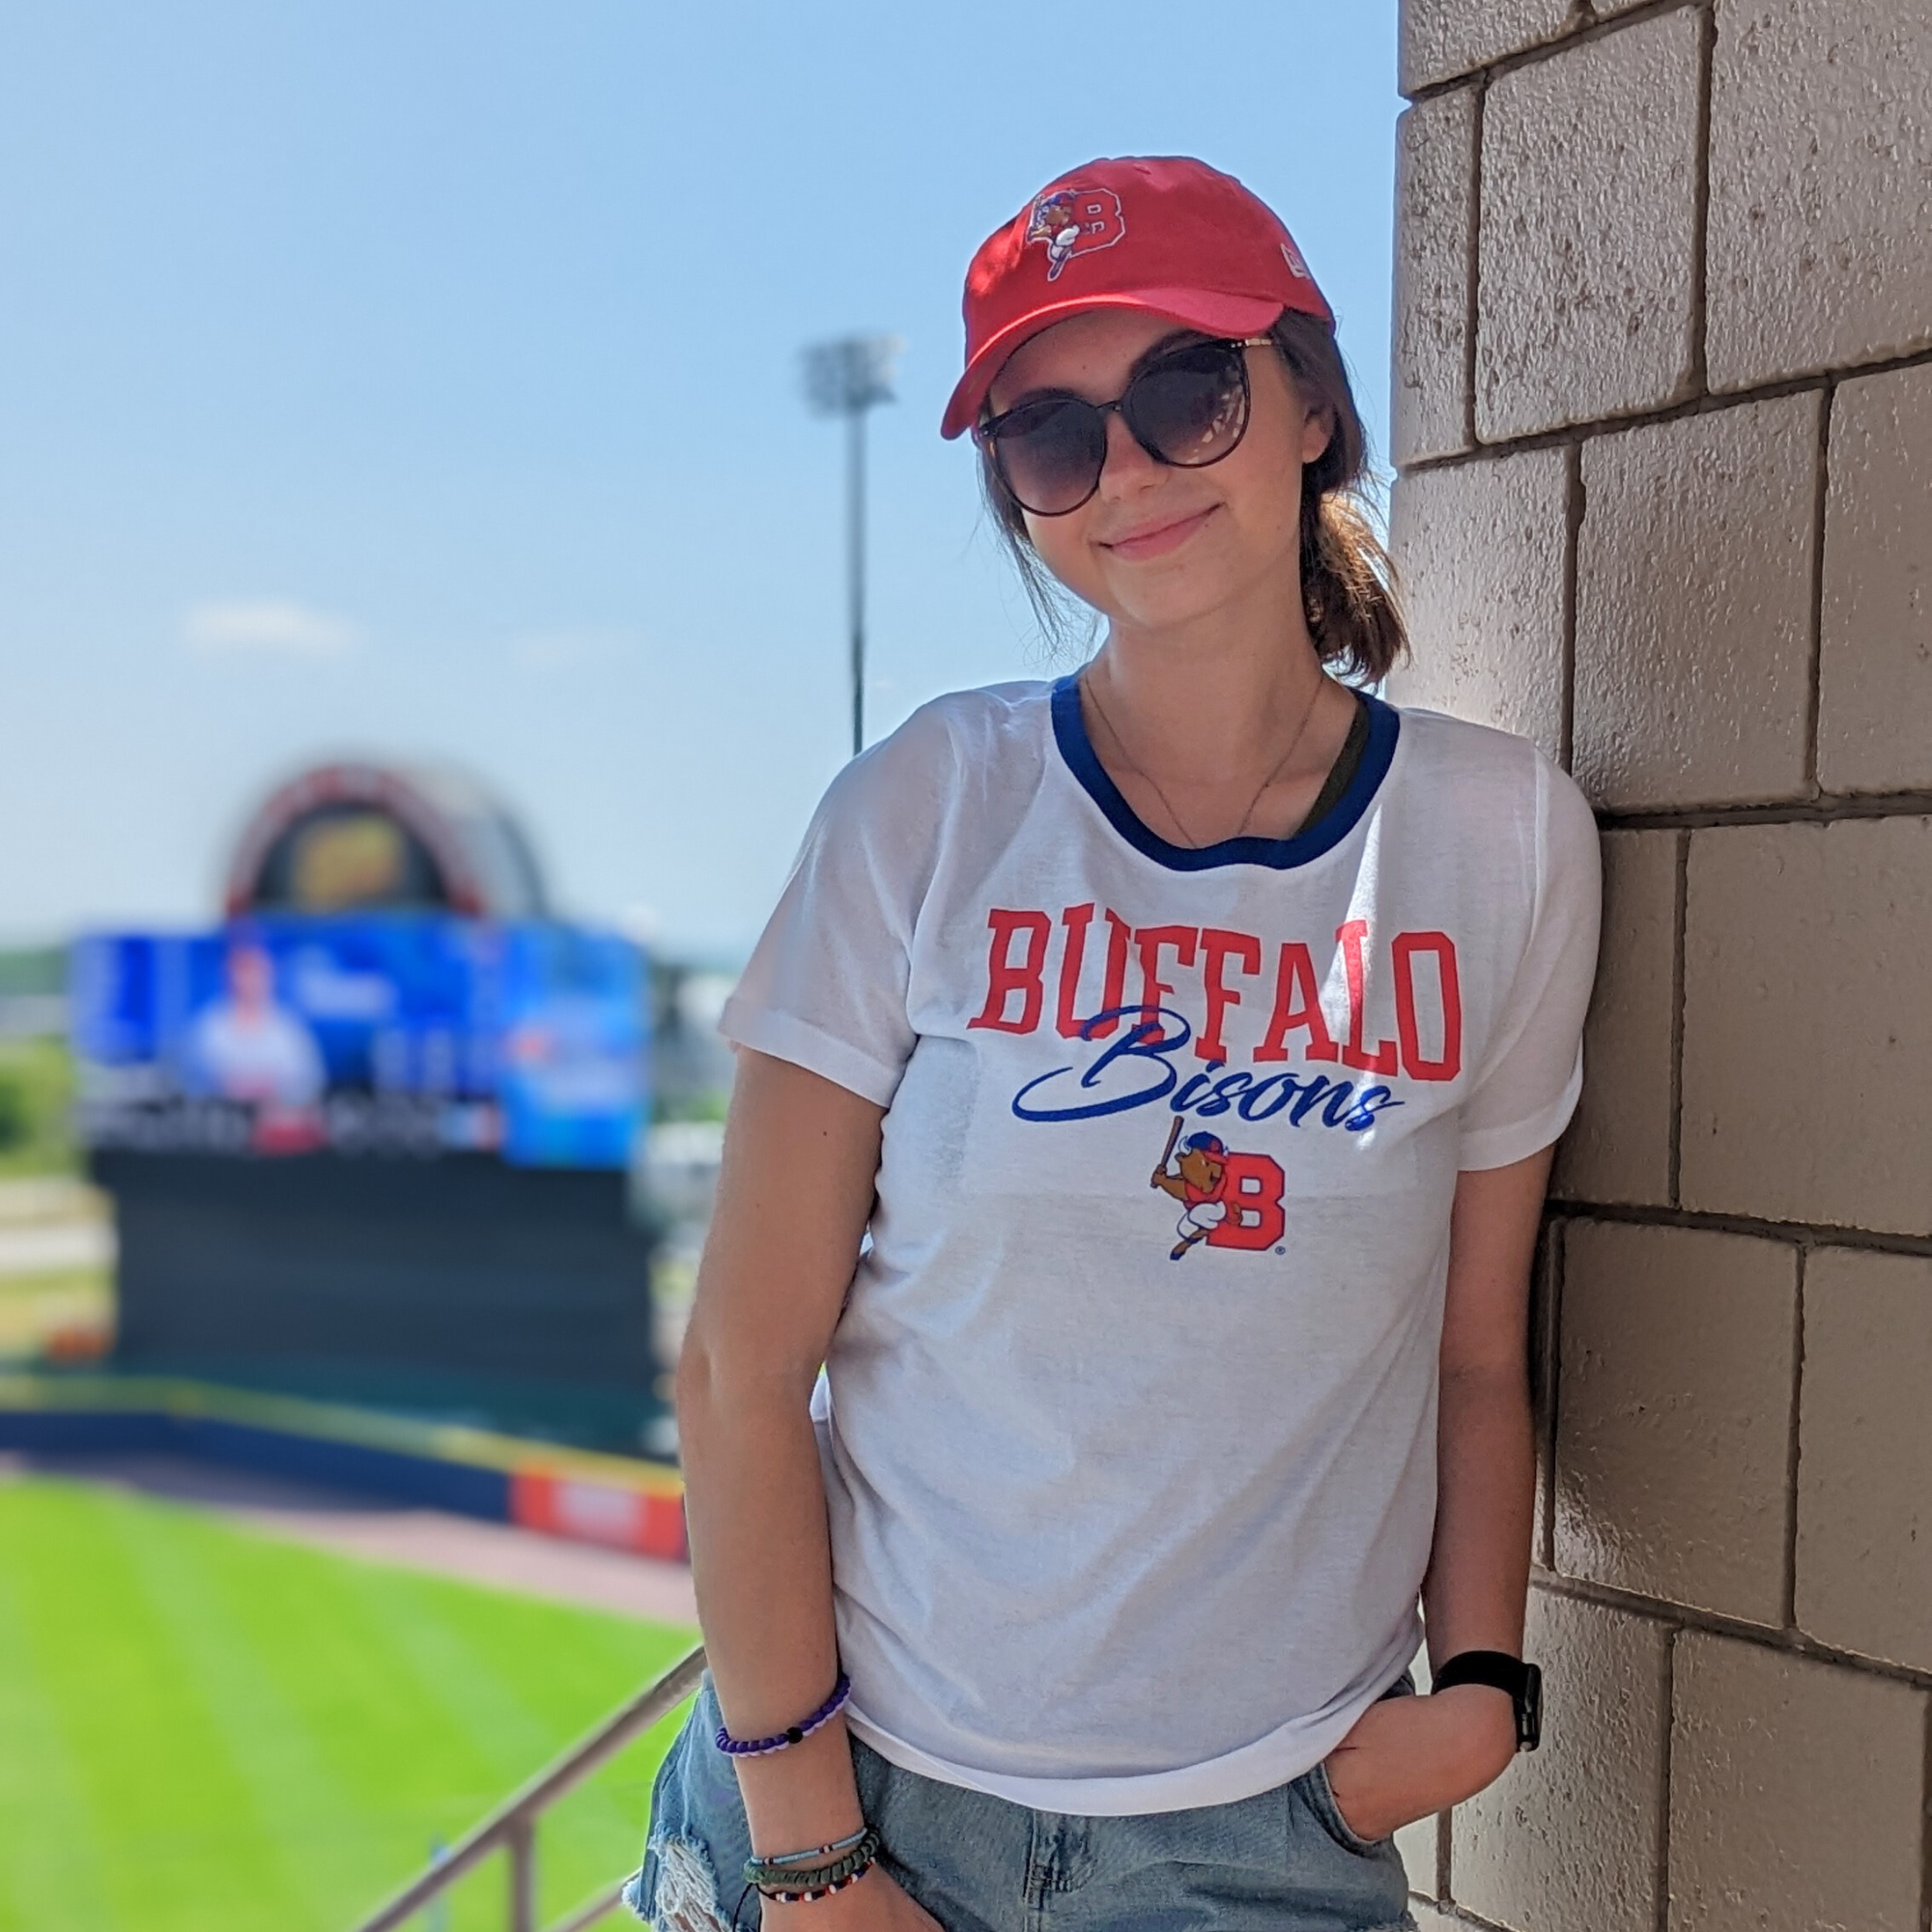 women posing for a photo at a baseball game wearing buffalo bisons apparel